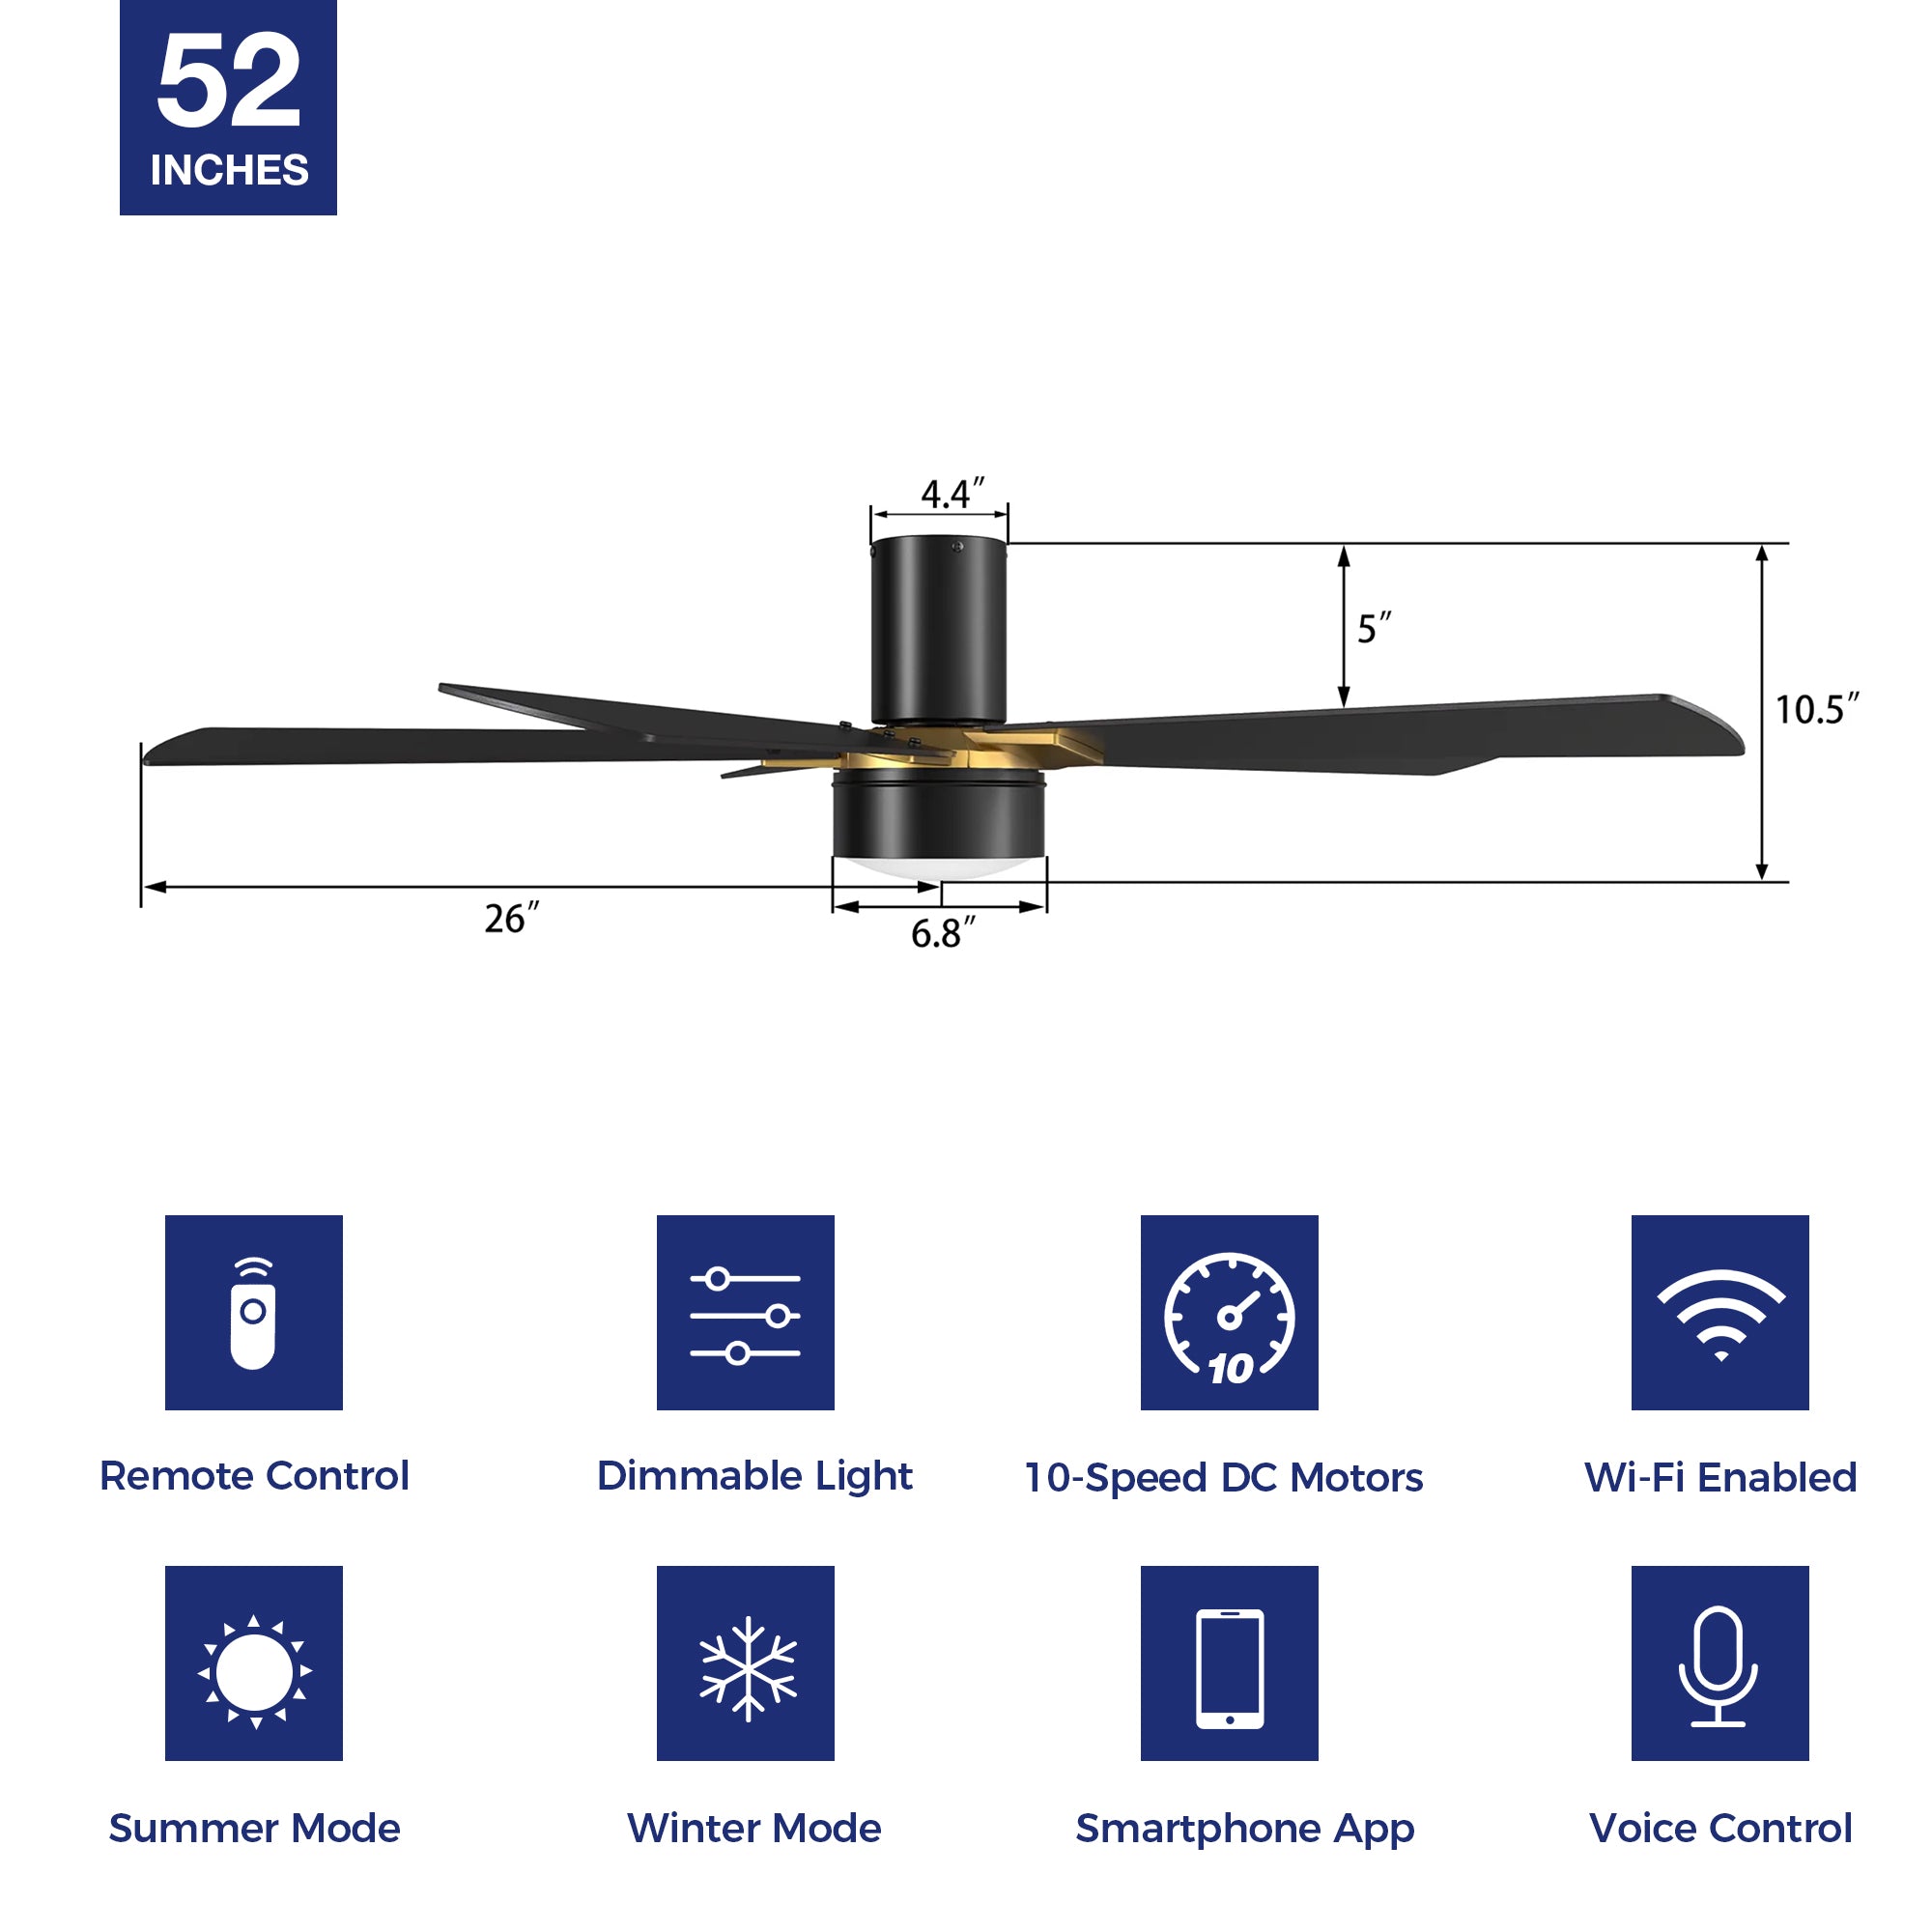 This Duluth 52&quot; smart ceiling fan keeps your space cool, bright, and stylish. It is a soft modern masterpiece perfect for your large indoor living spaces. This Wifi smart ceiling fan is a simplicity designing with Black finish, use elegant Plywood blades and has an integrated 4000K LED cool light. The fan features Remote control, Wi-Fi apps, Siri Shortcut and Voice control technology (compatible with Amazon Alexa and Google Home Assistant ) to set fan preferences.